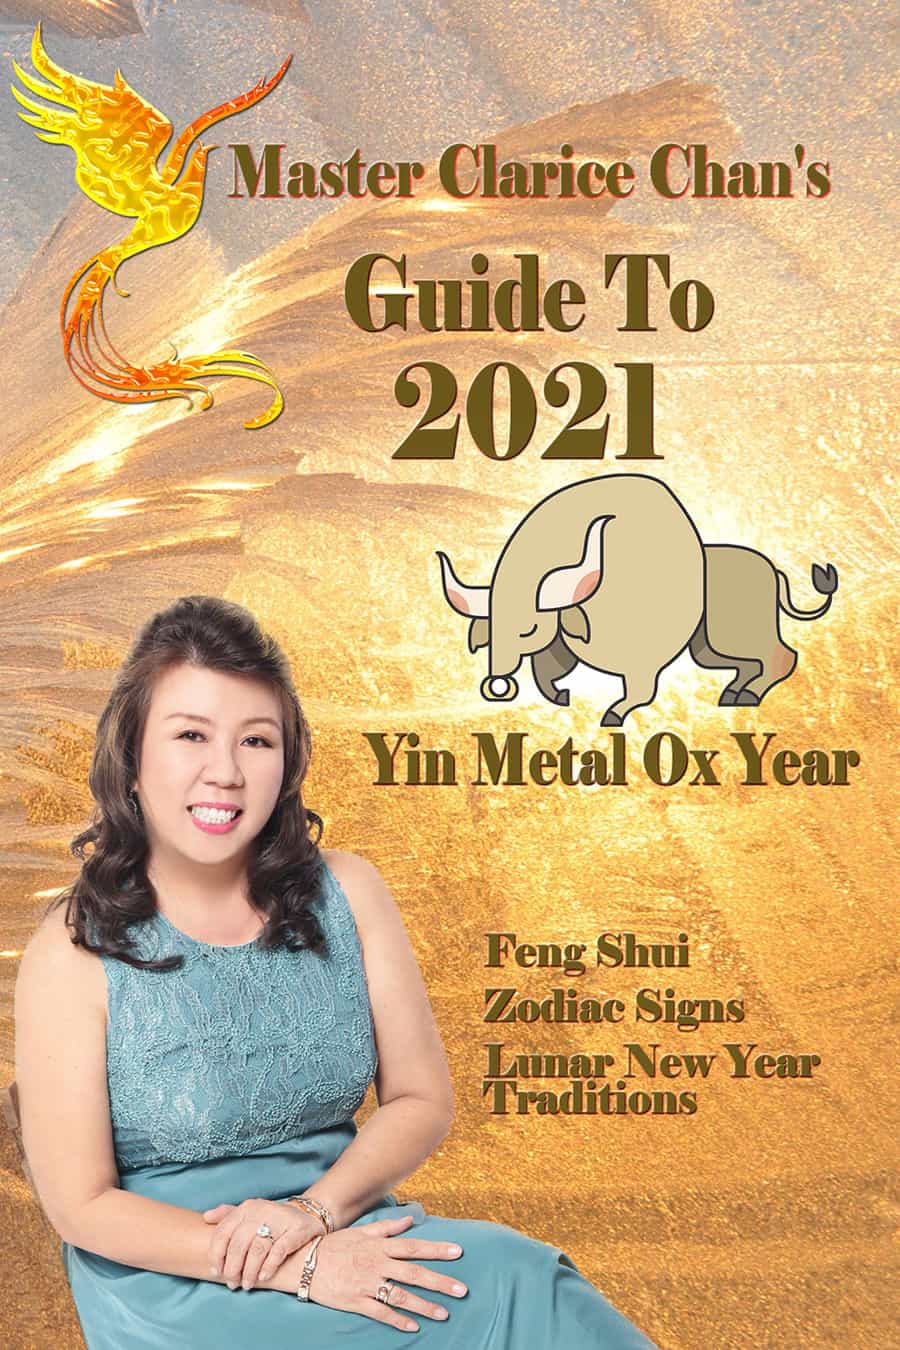 Master Clarice Chan’s Guide to 2021